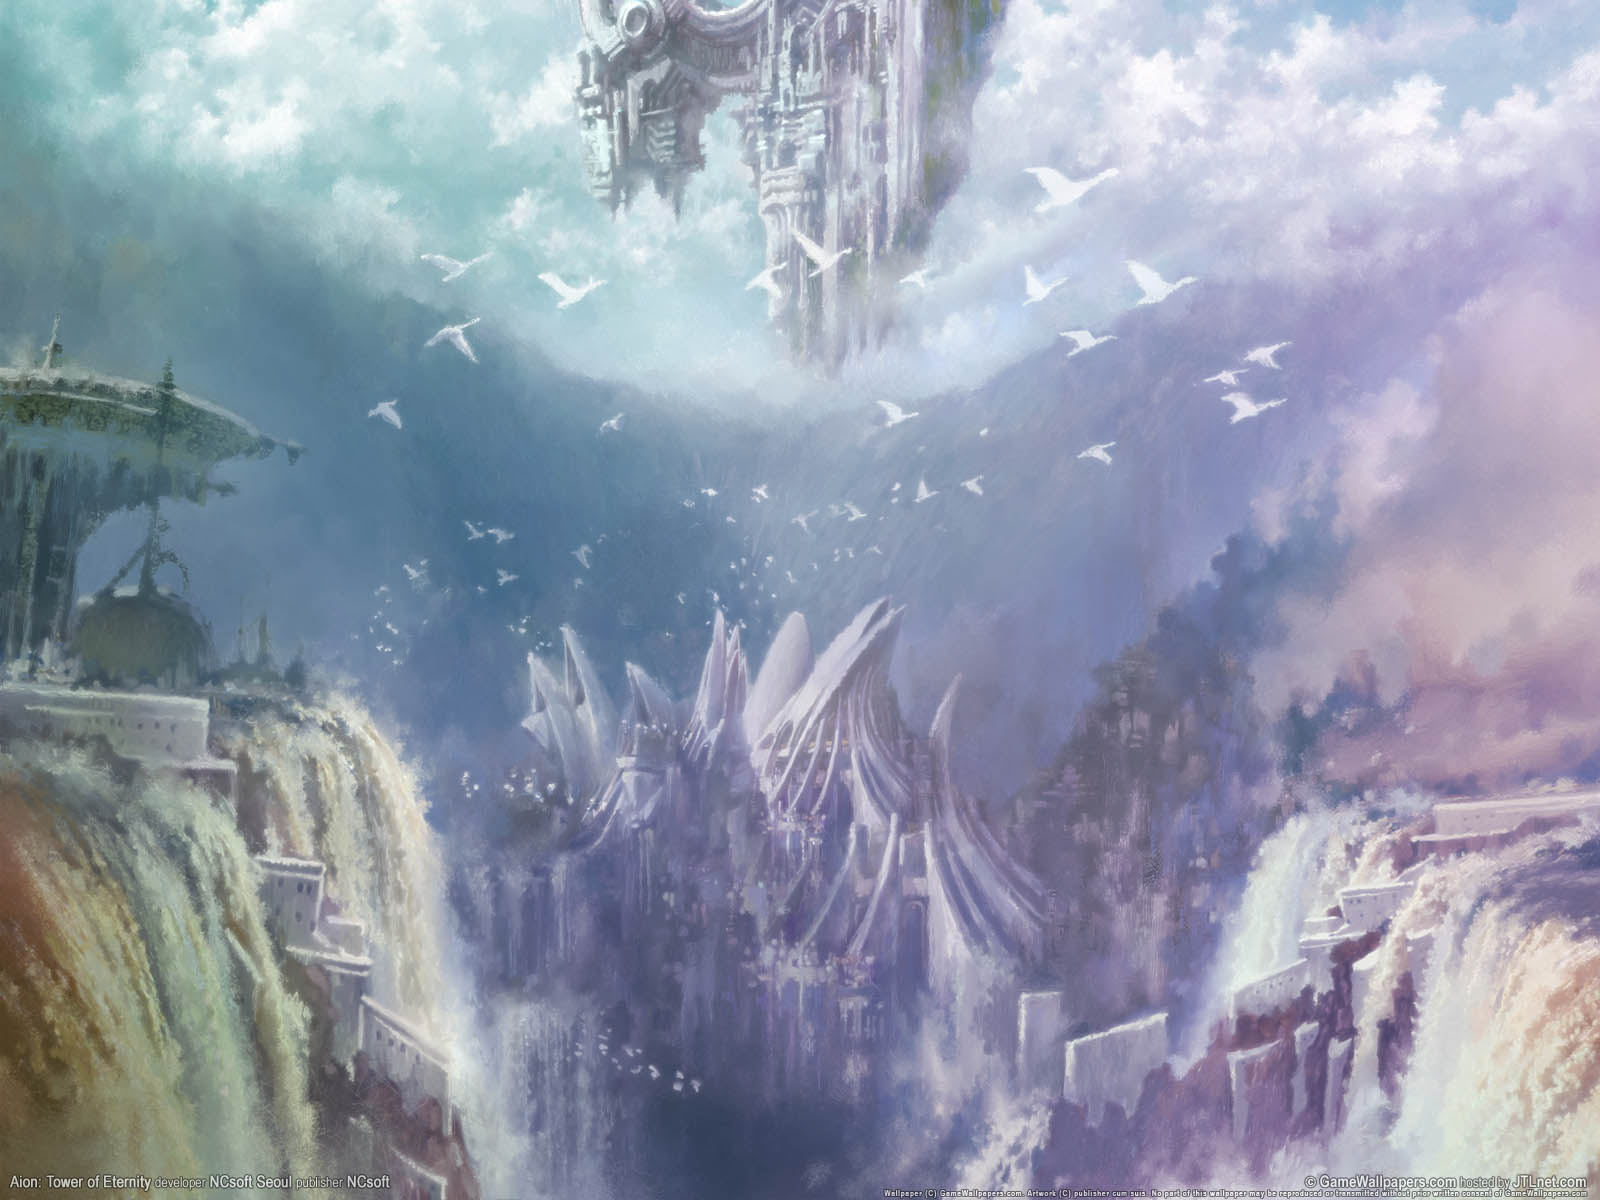 Aion%3A Tower of Eternity wallpaper 07 1600x1200